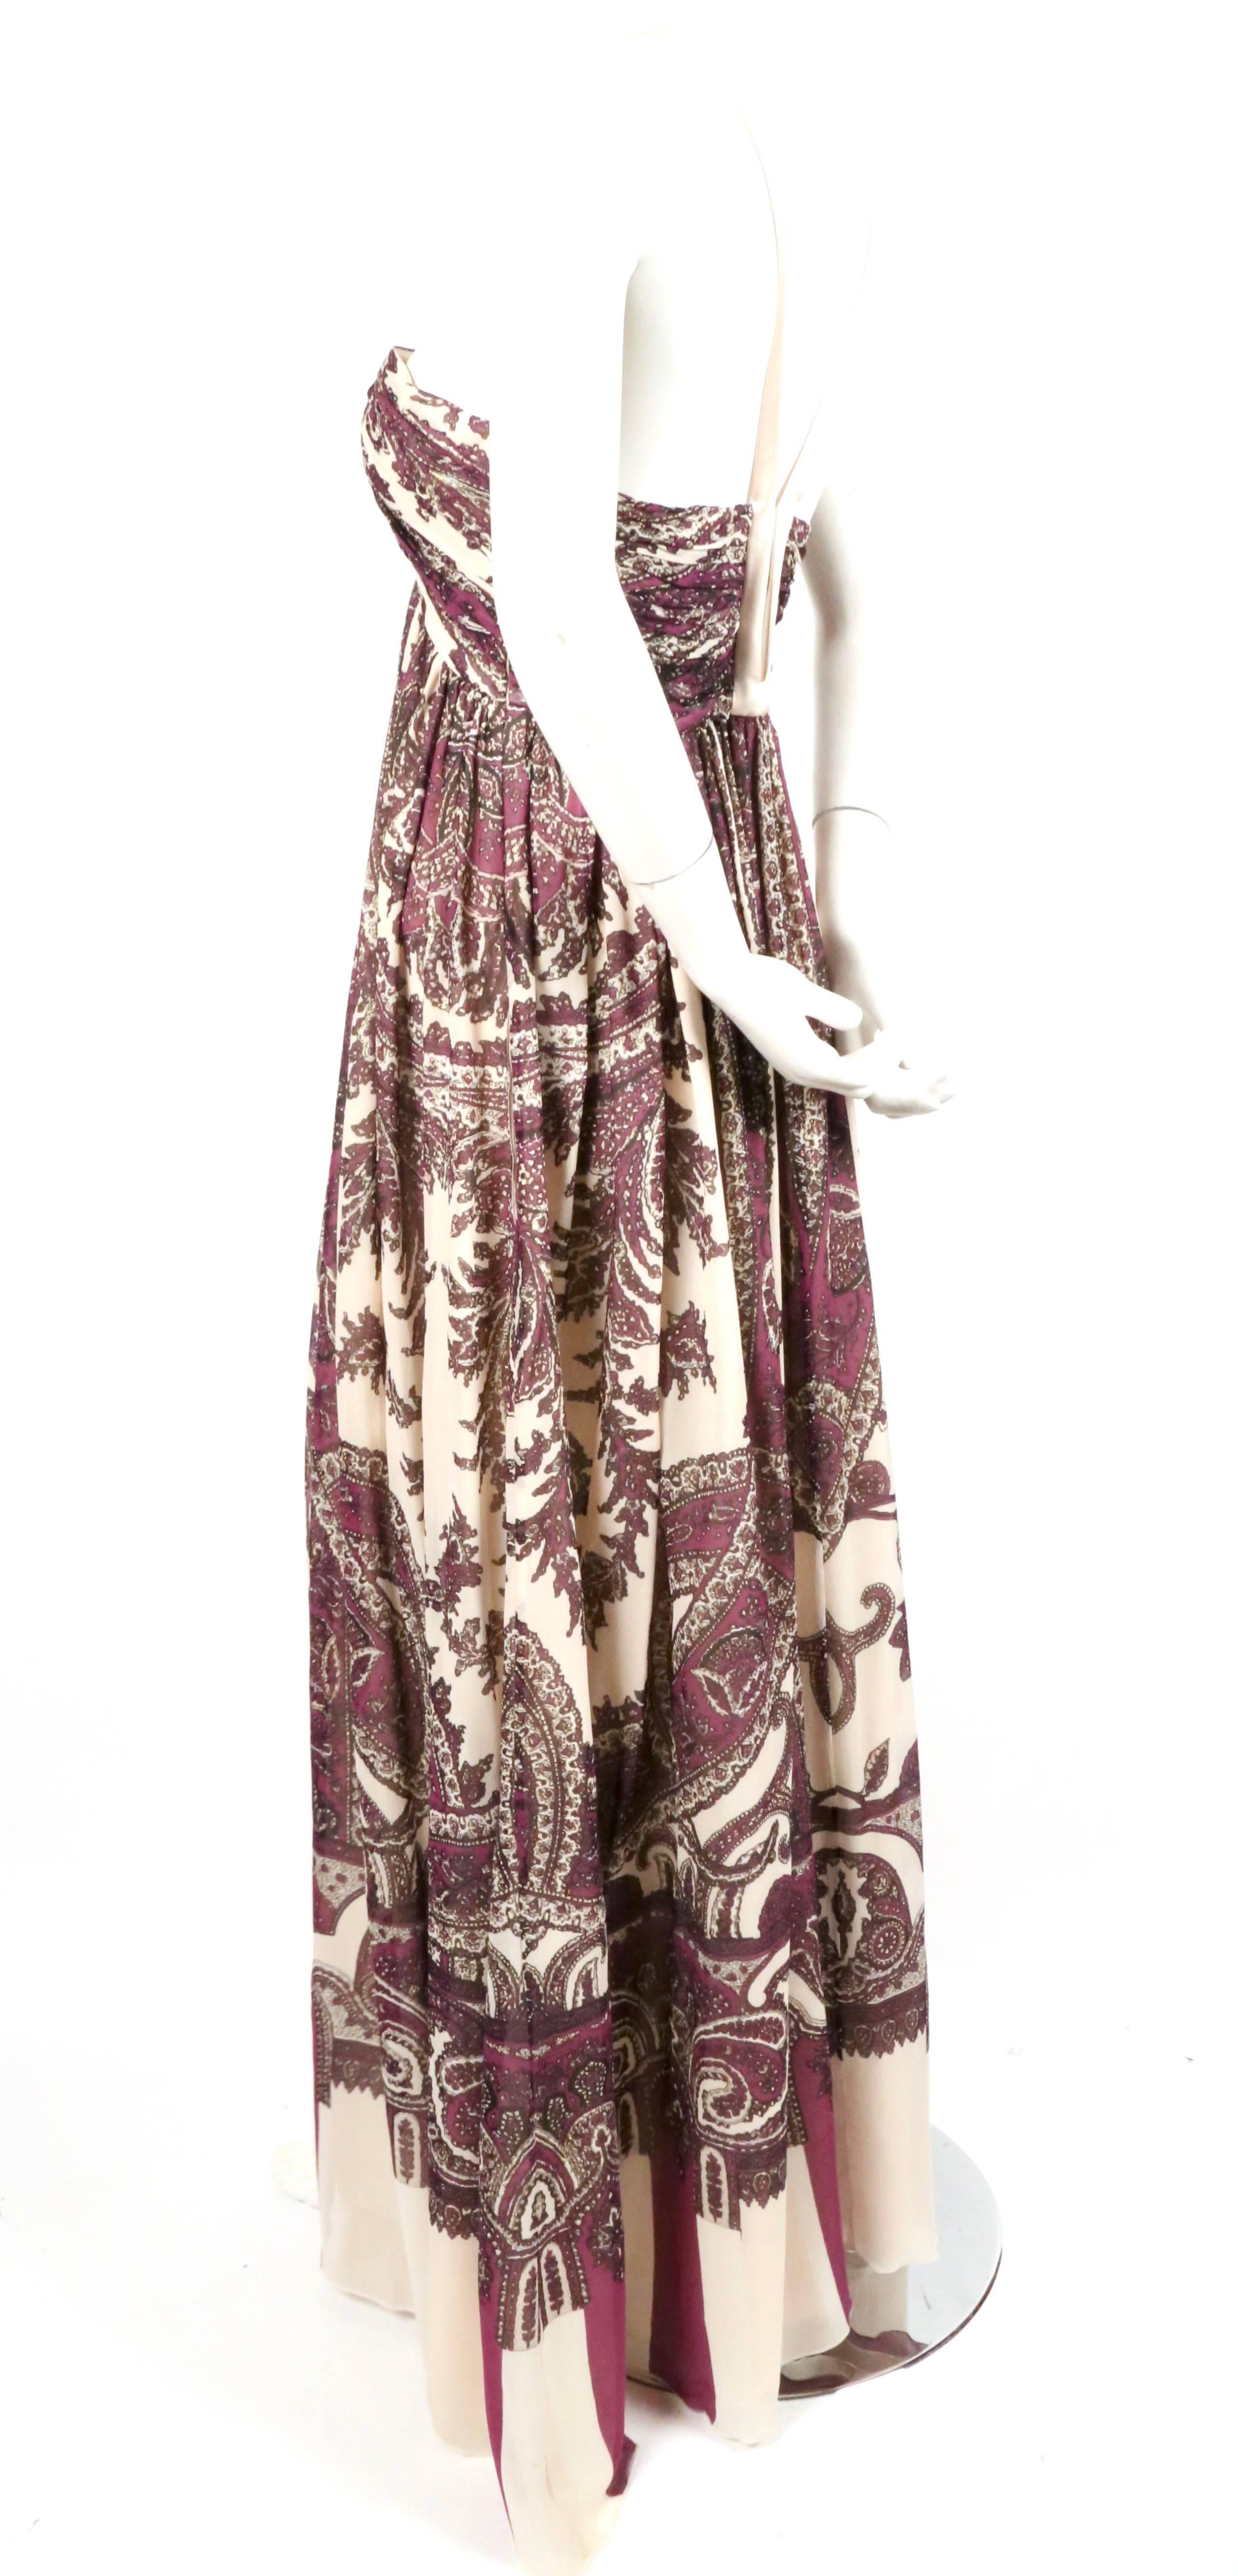 Paisley printed silk chiffon gown with satin straps from Roberto Cavalli. Colors are purple, black and a light blush shade with gold metallic shades throughout. Labeled an Italian size 44 however this dress runs small and will best fits a US 4 or 6.